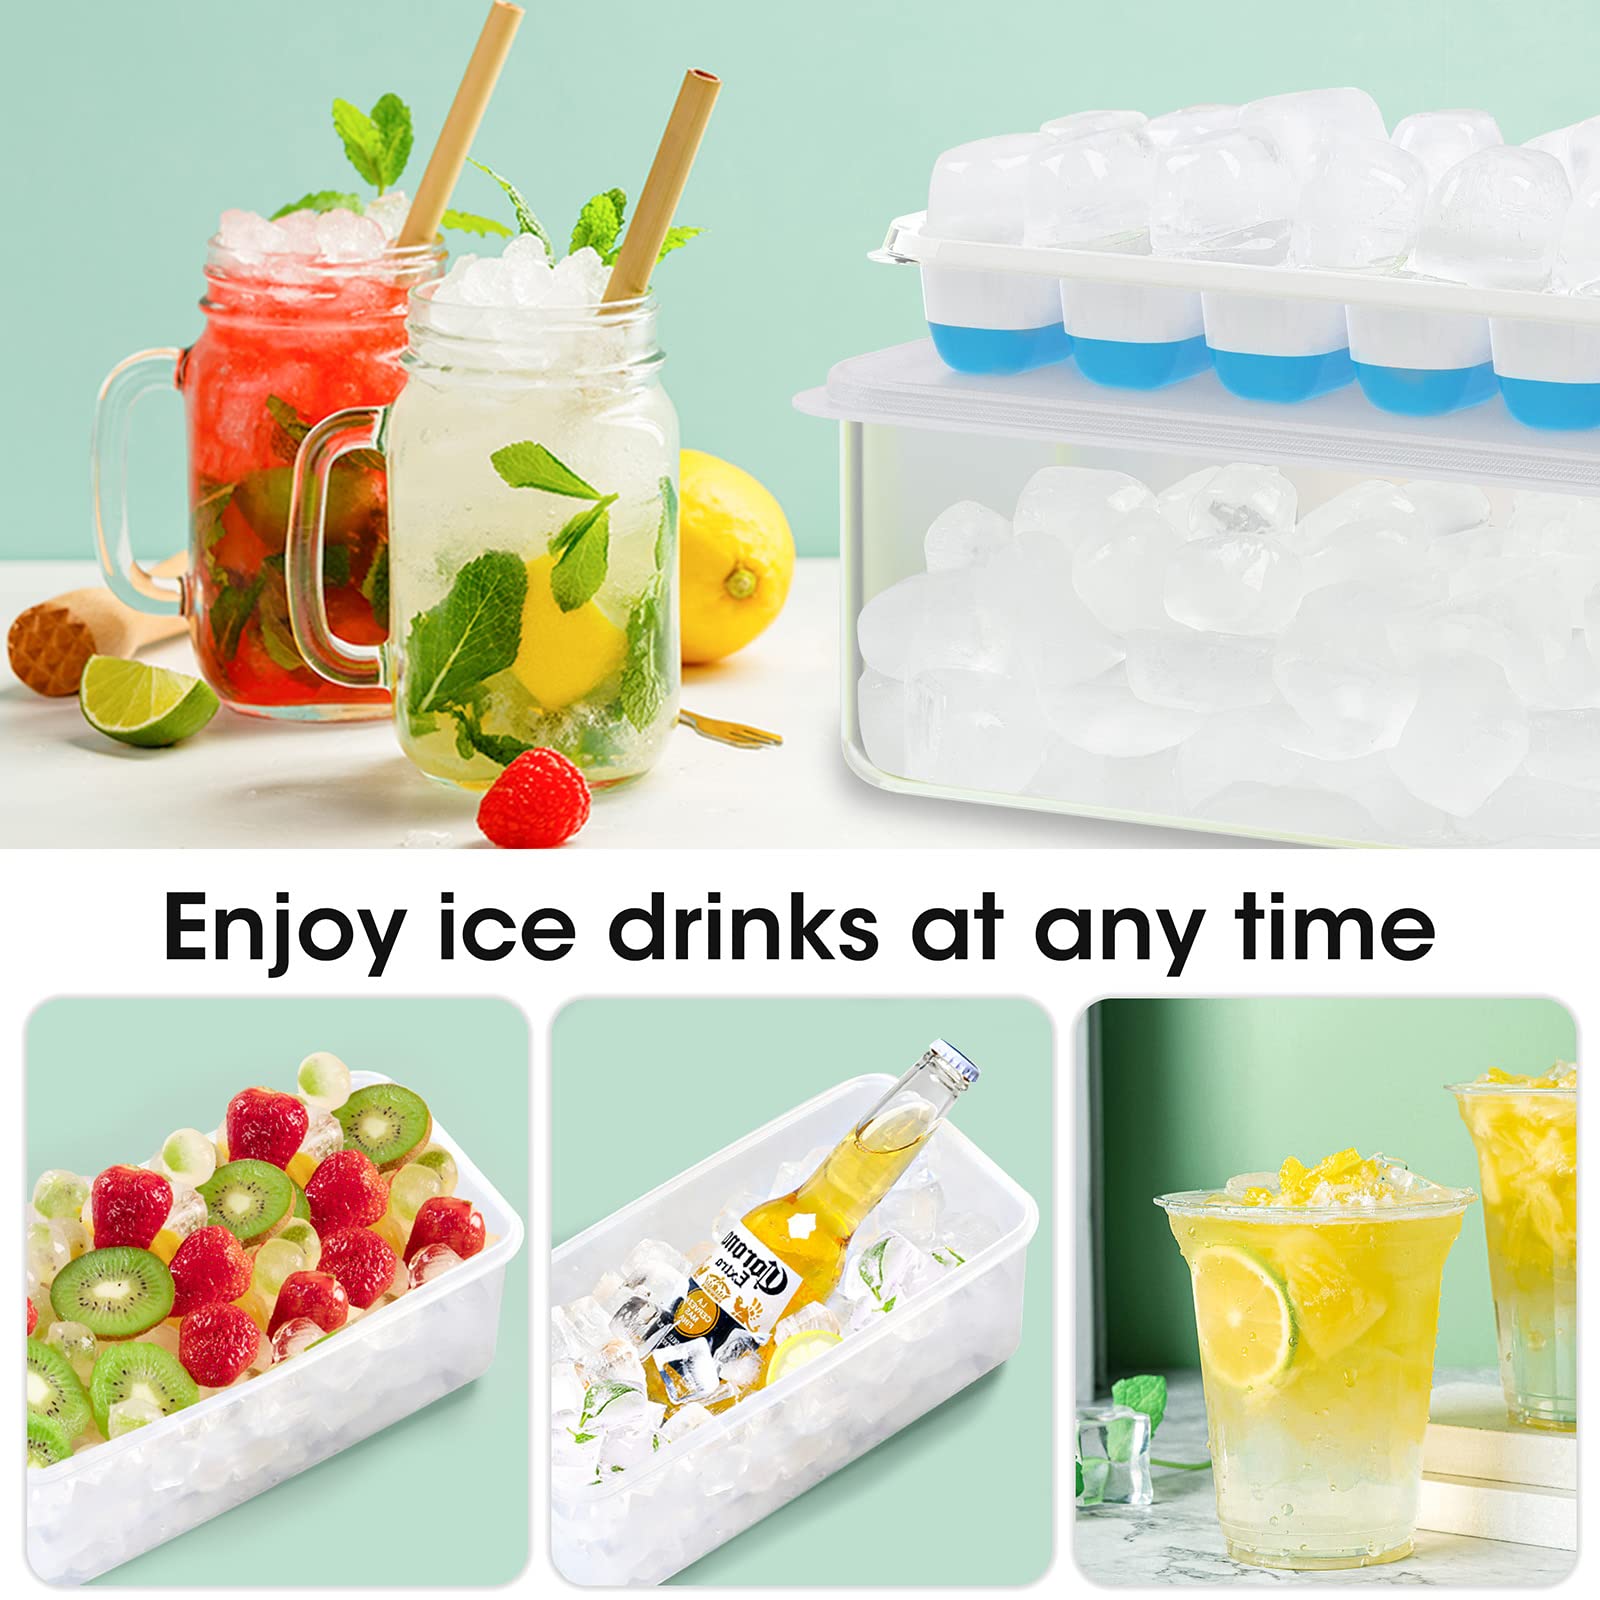 DOQAUS Ice Cube Tray with Lid and Bin, Upgraded Silicone Ice Cube Trays for Freezer with Container Ice Cube Maker Stackable Easy Release, 2 Pack Ice Trays & 1 Pack Ice Bucket Tong Scoop